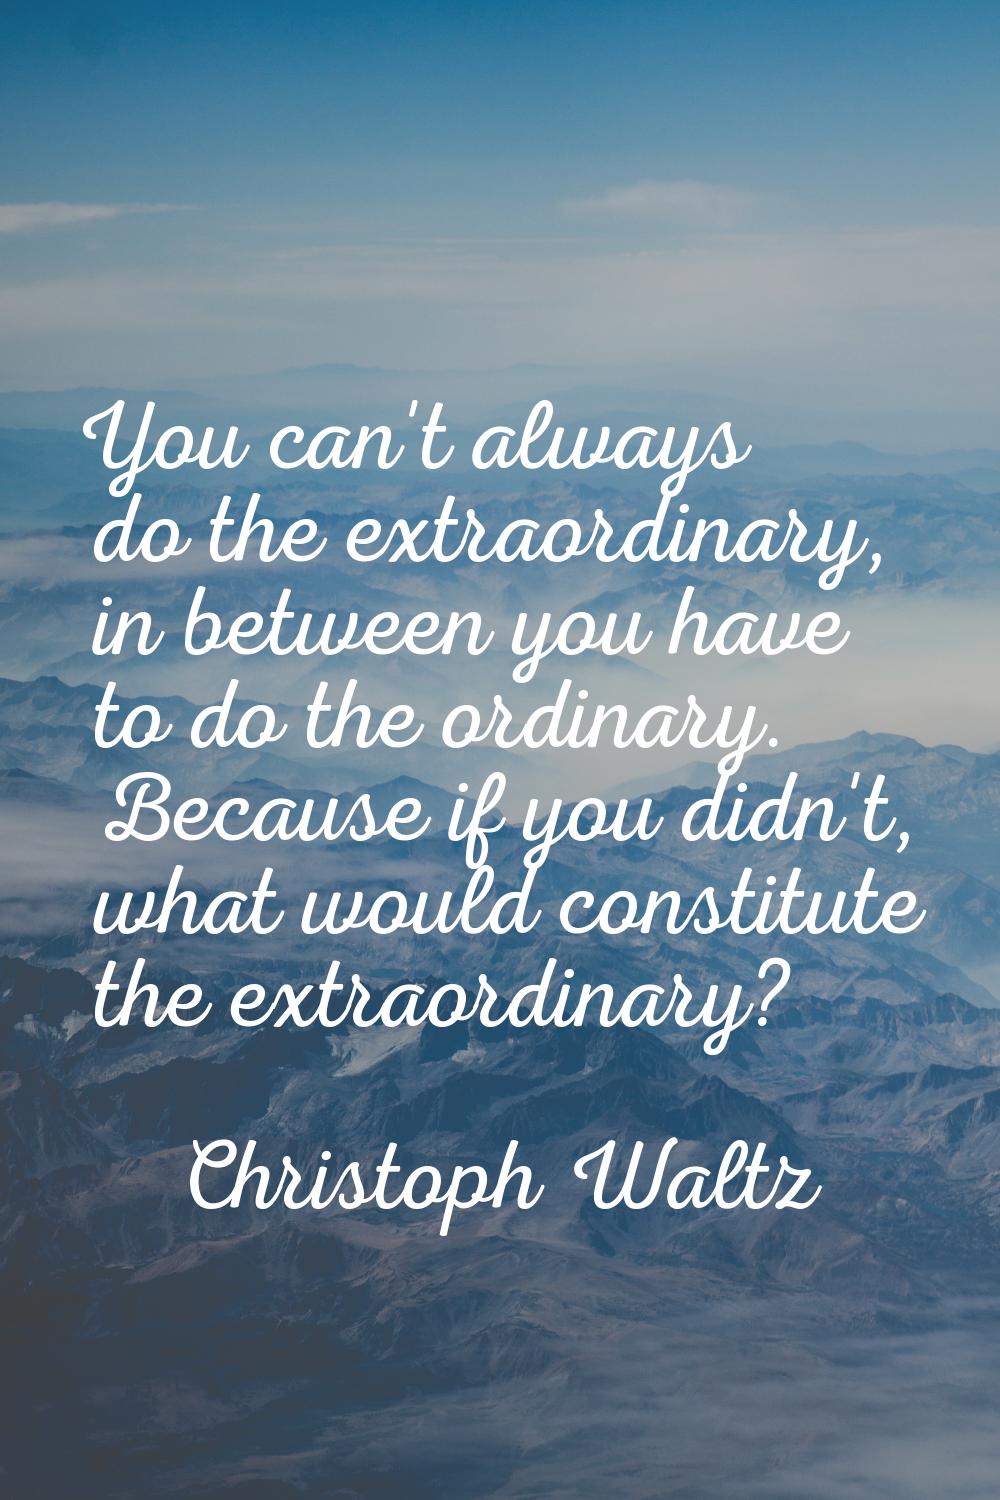 You can't always do the extraordinary, in between you have to do the ordinary. Because if you didn'